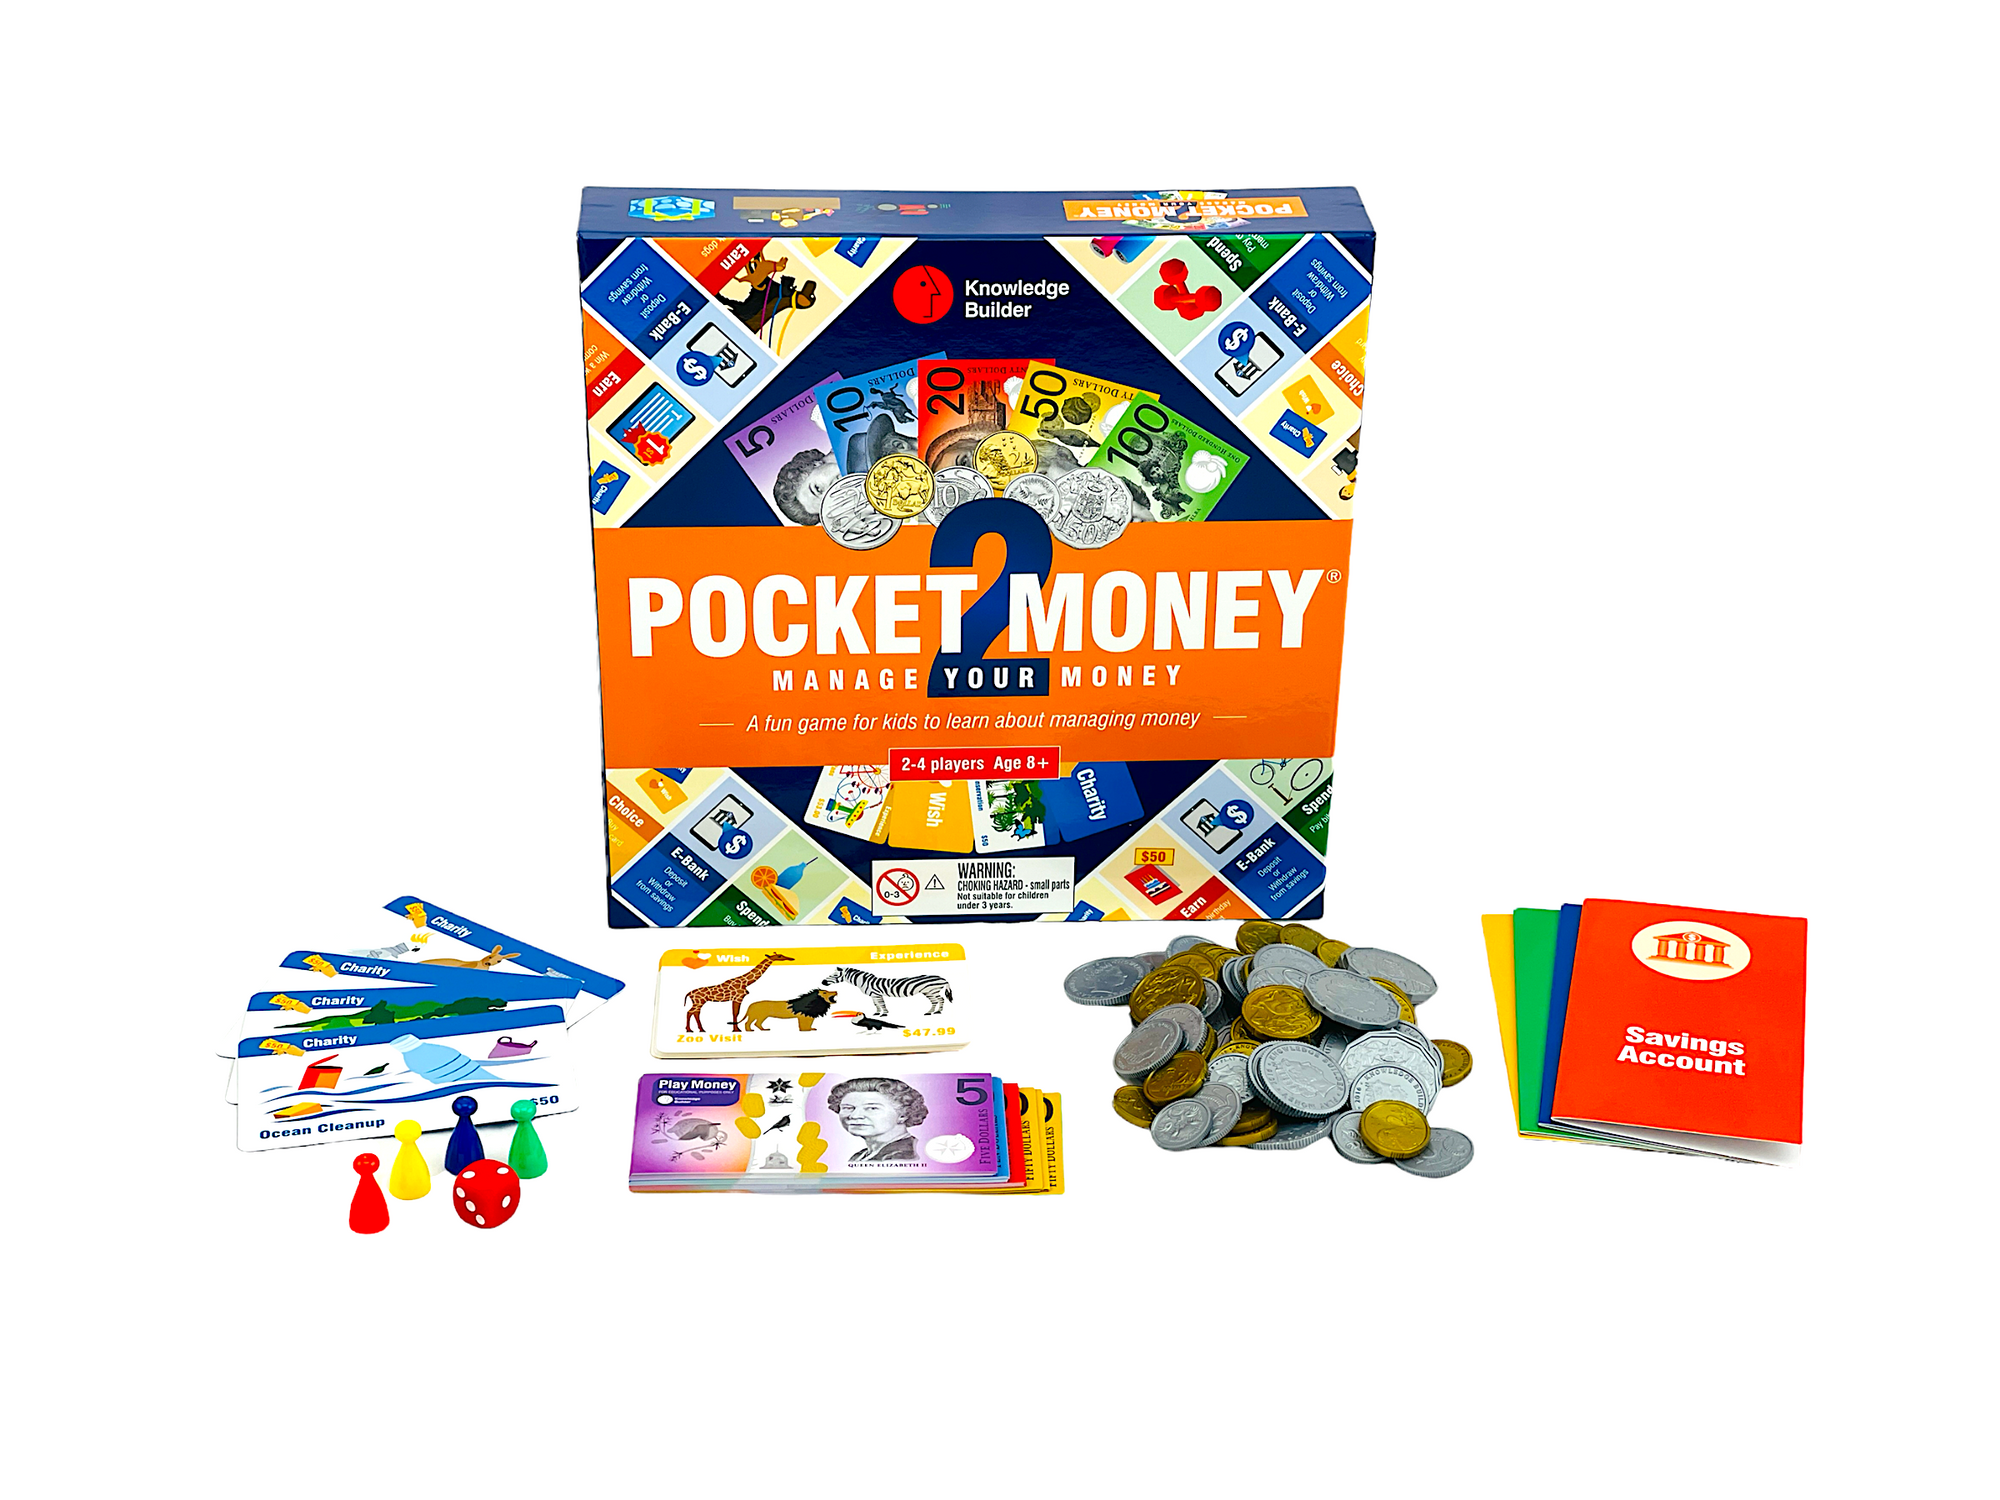 Knowledge Builder Pocket Money 2 - Manage Money on display with contents in front of box